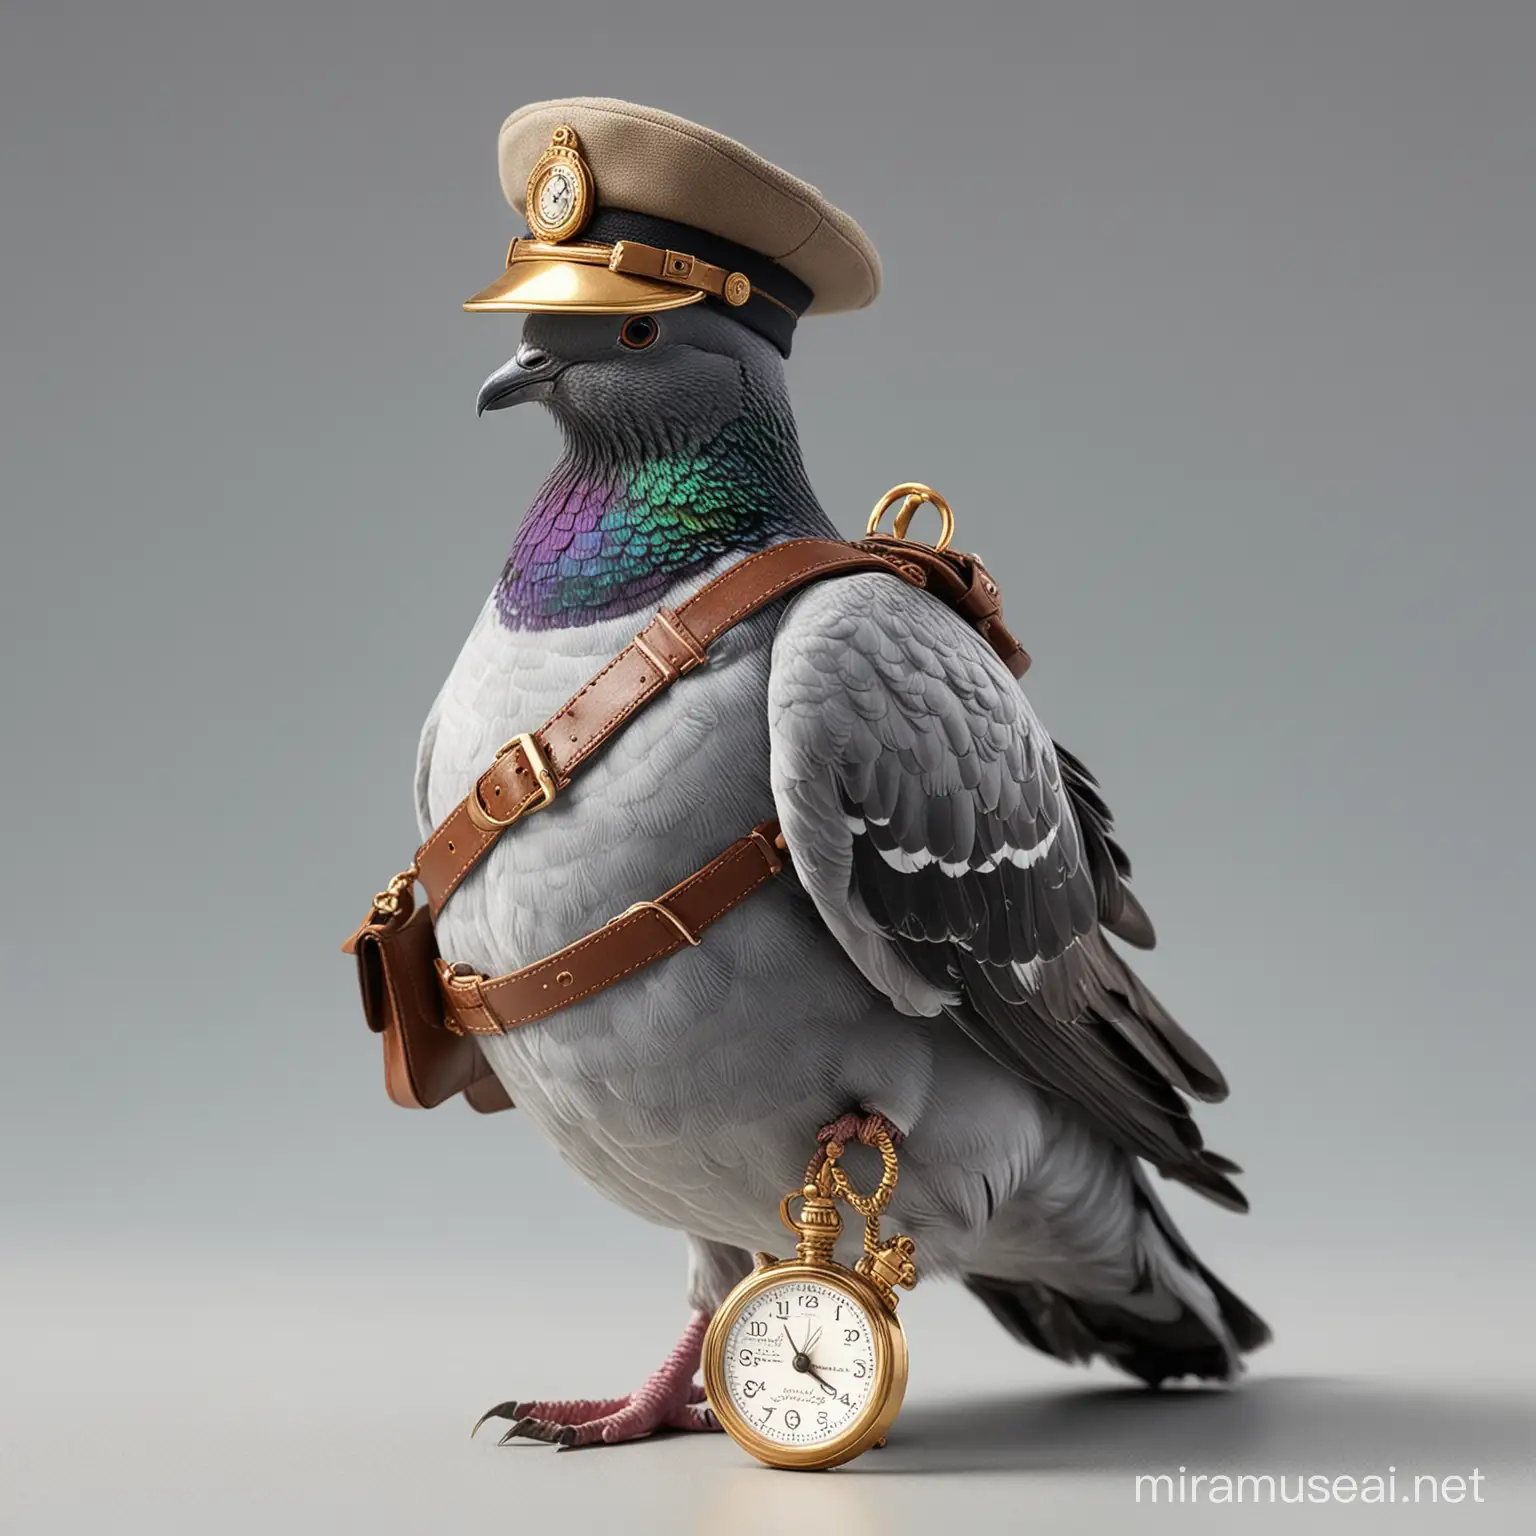  pigeon wearing a mailman hat with a satchel and has a gold stopwatch